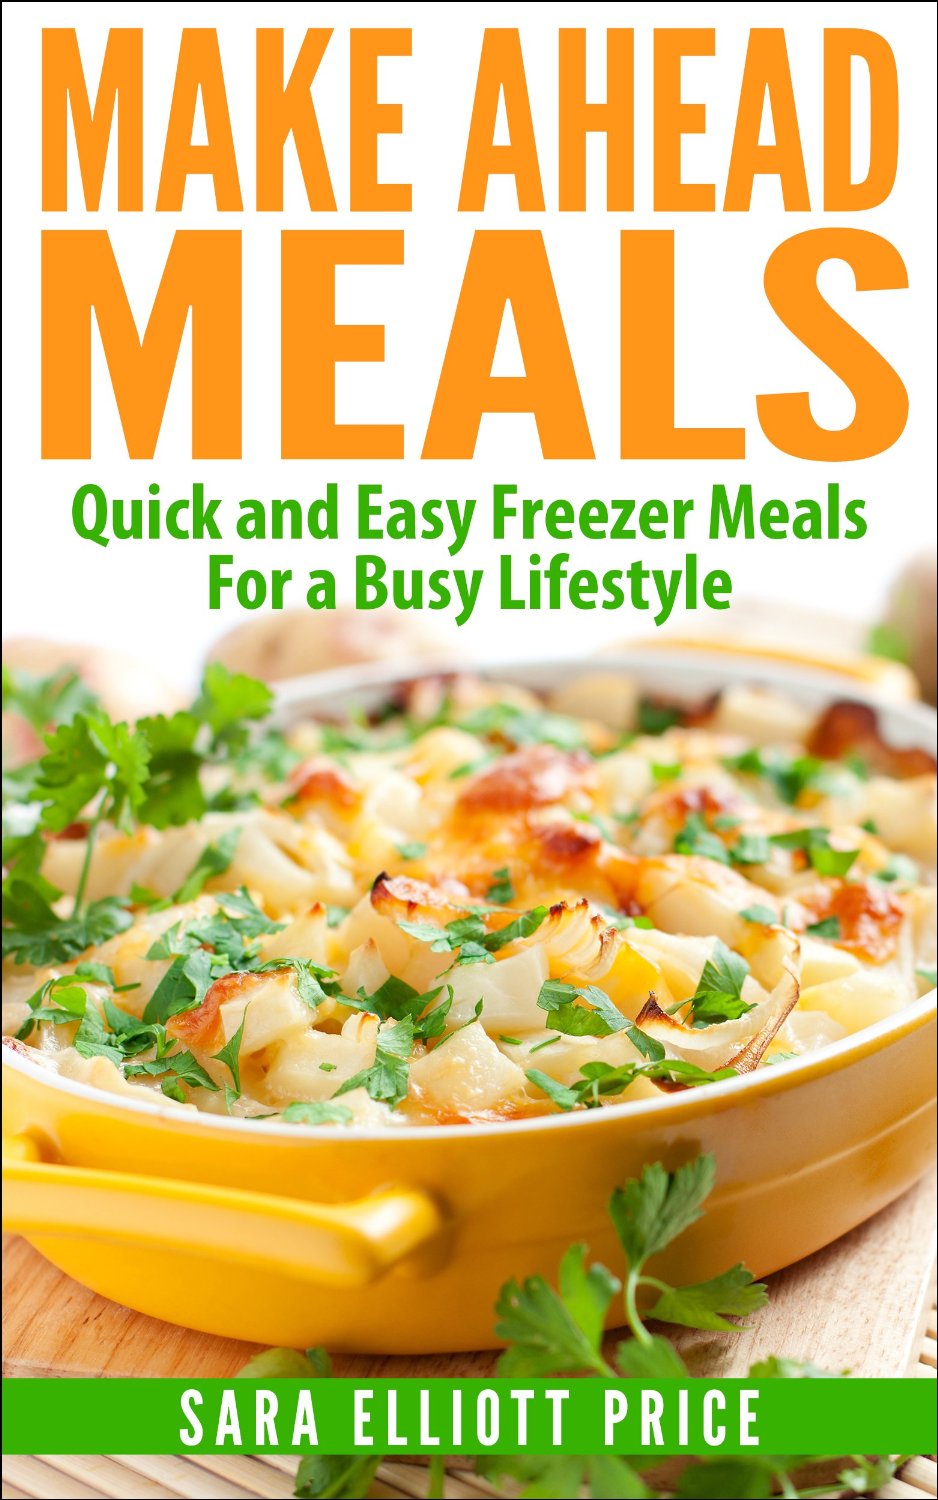 Make Ahead Meals: Quick and Easy Freezer Meals For a Busy Lifestyle by Sara Elliott Price